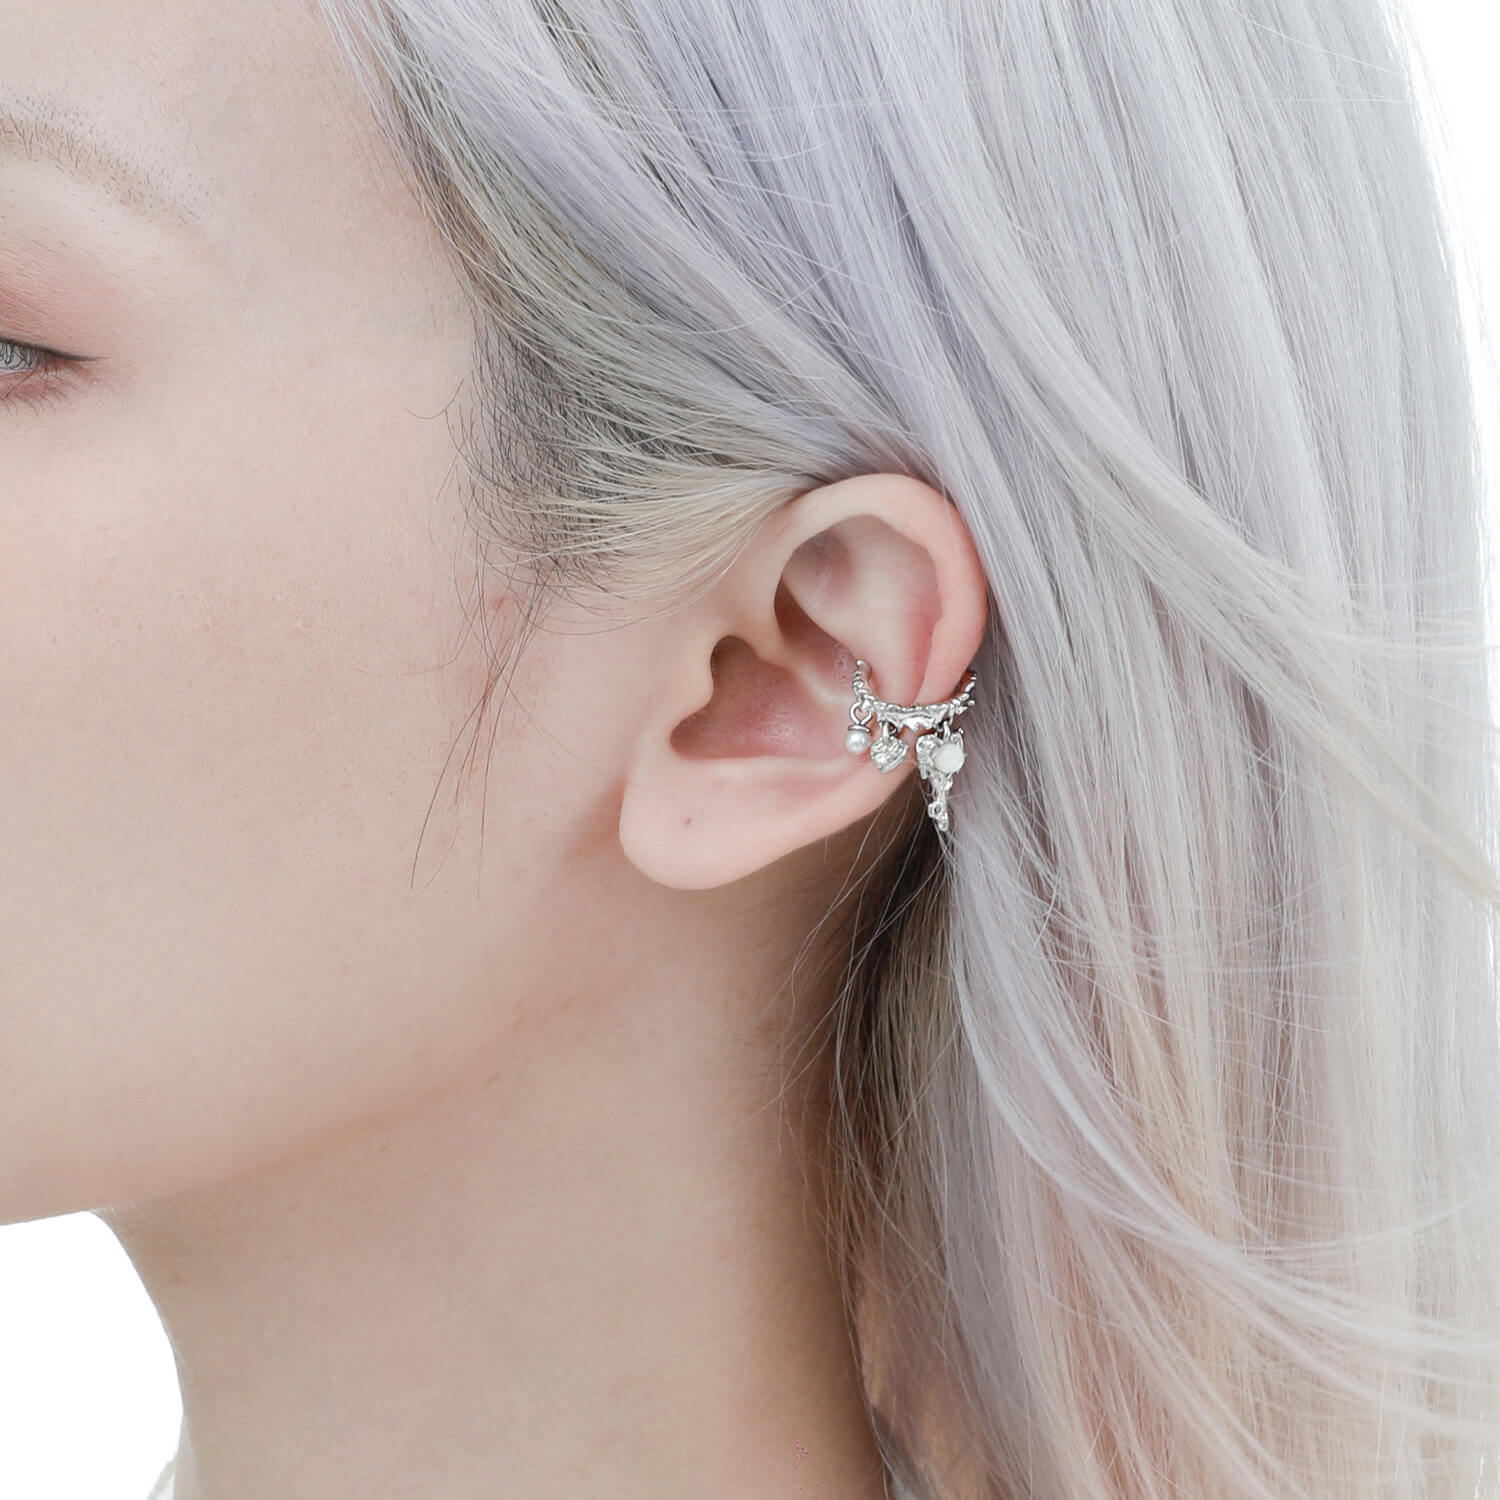 Crafted from white gold-plated copper, these ear clips exude a timeless elegance. The subtle silver tones blend seamlessly with the intricate pendant design. The overall diameter of 14mm and lightweight of approximately 1.5g per pair ensure comfort without compromising style.